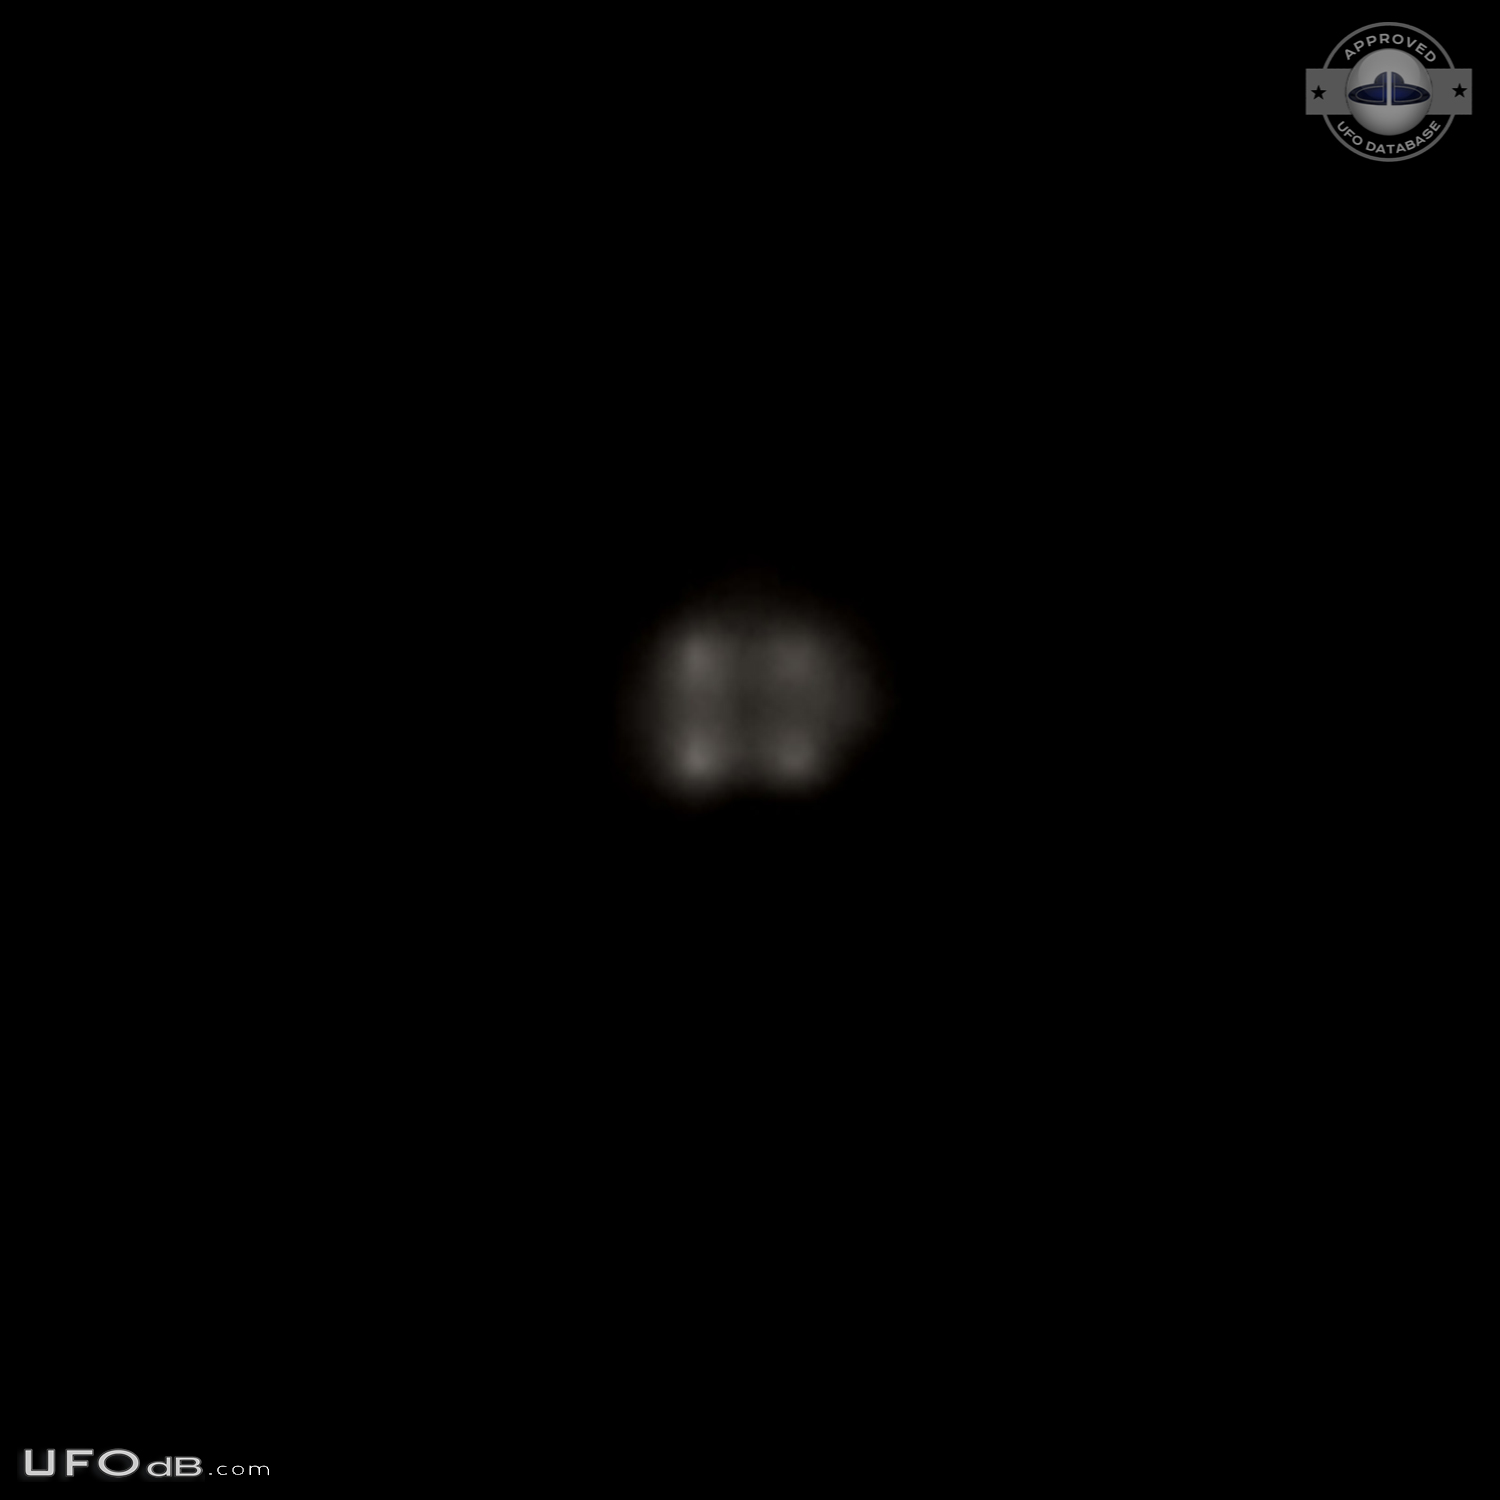 Square UFO with four thrusters fast shiny Hyderabad Telangana India UFO Picture #656-3